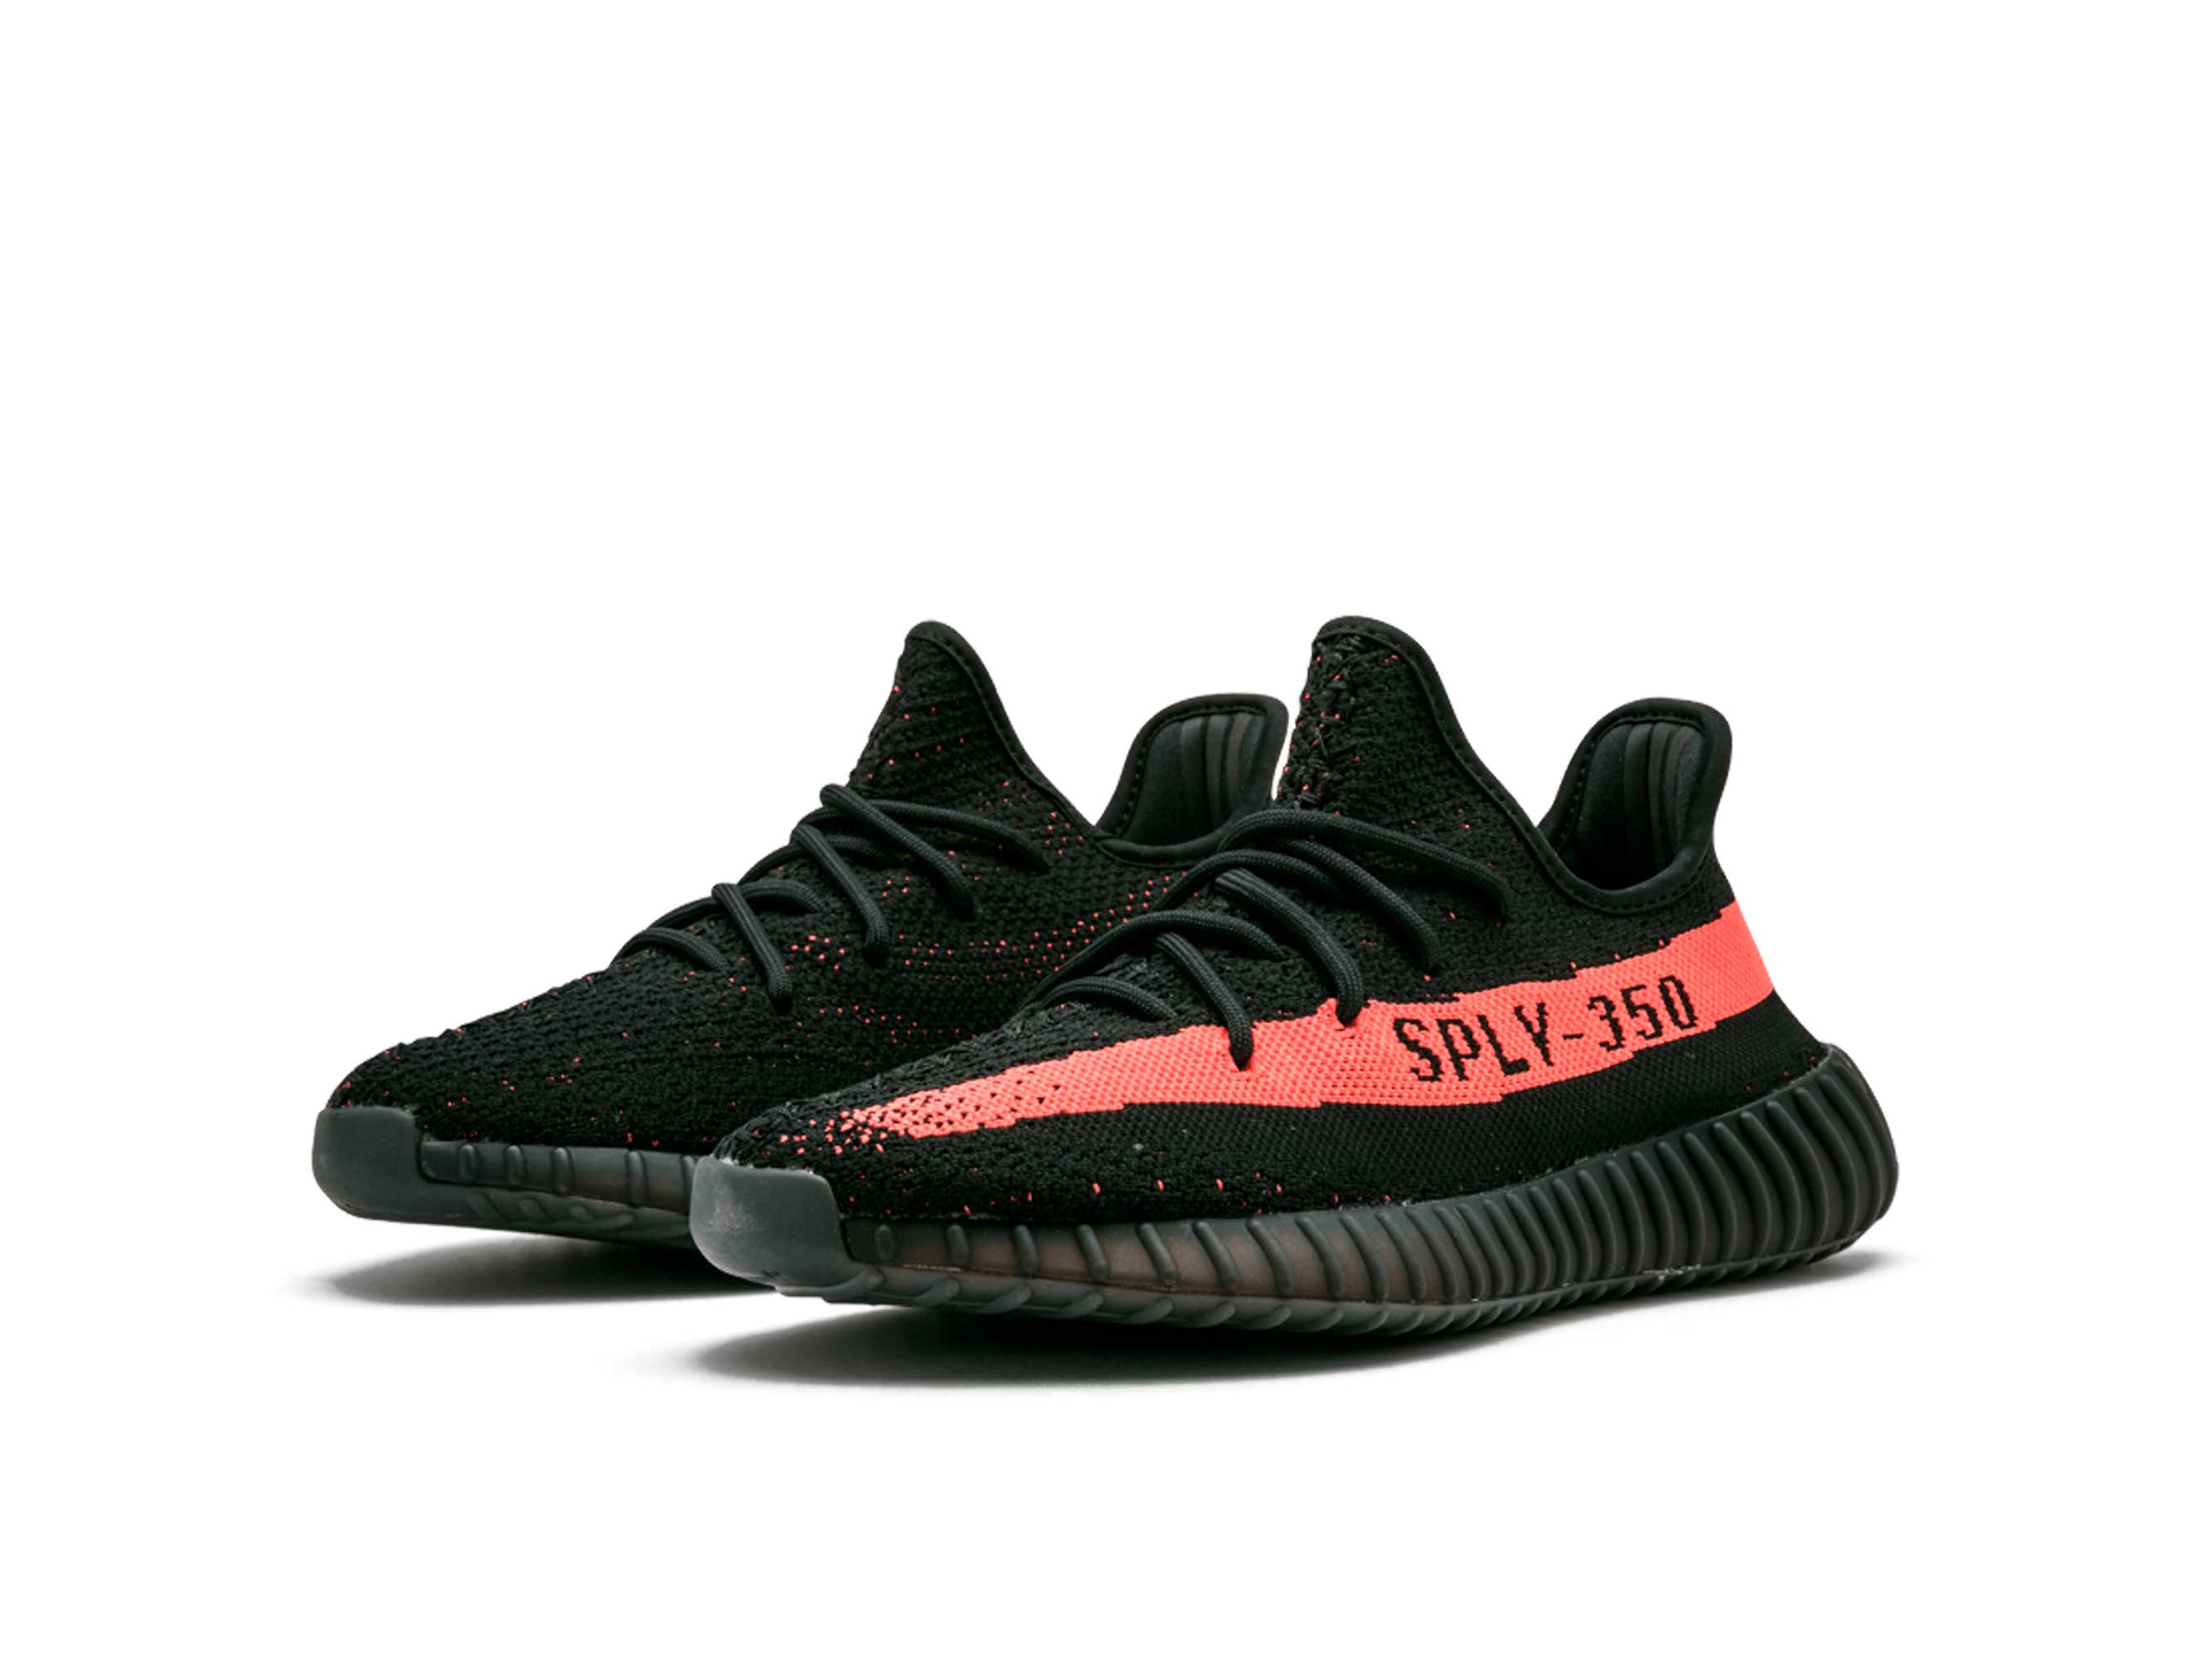 adidas yeezy boost black red